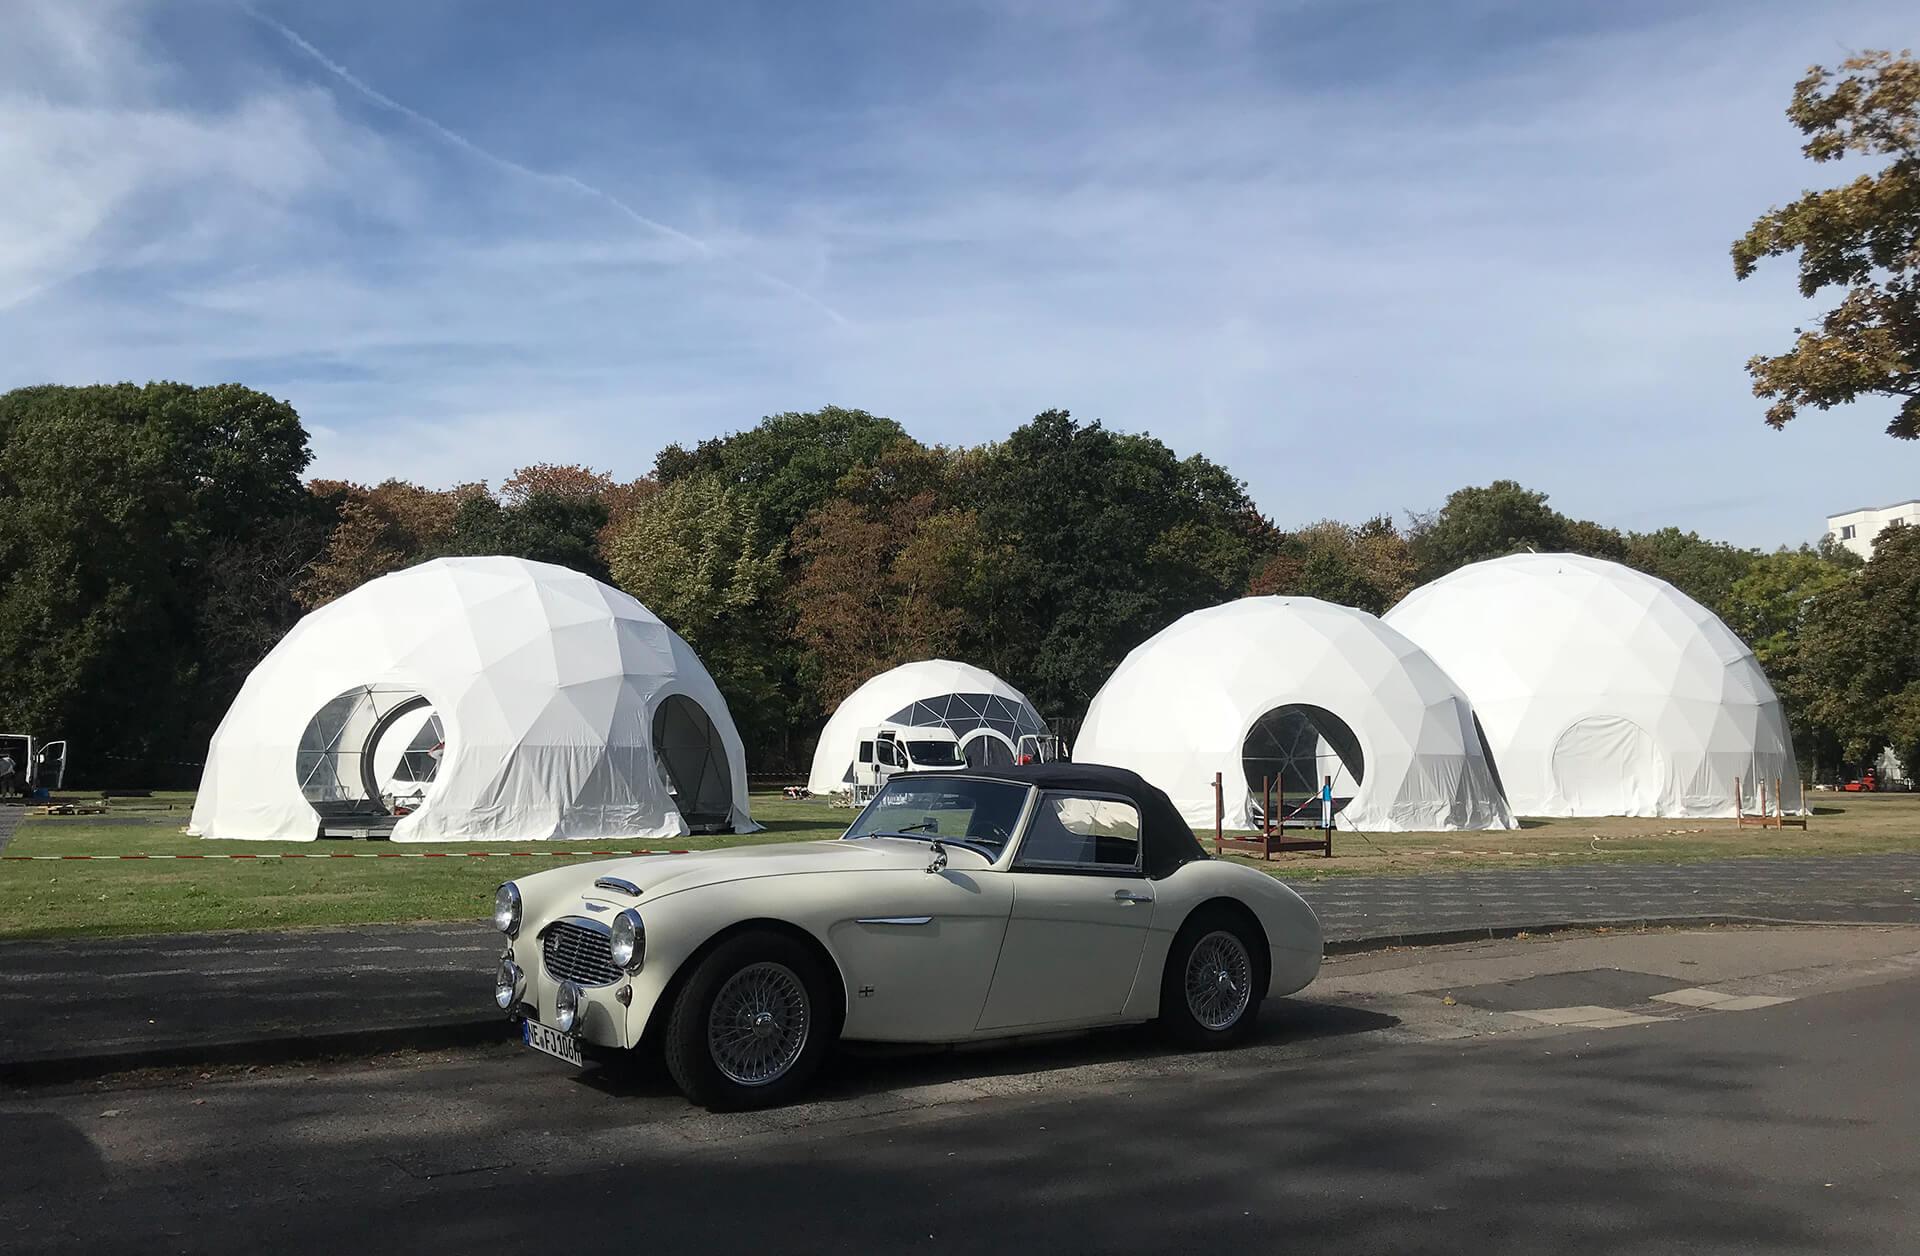 classic car against the background of white geodesic domes